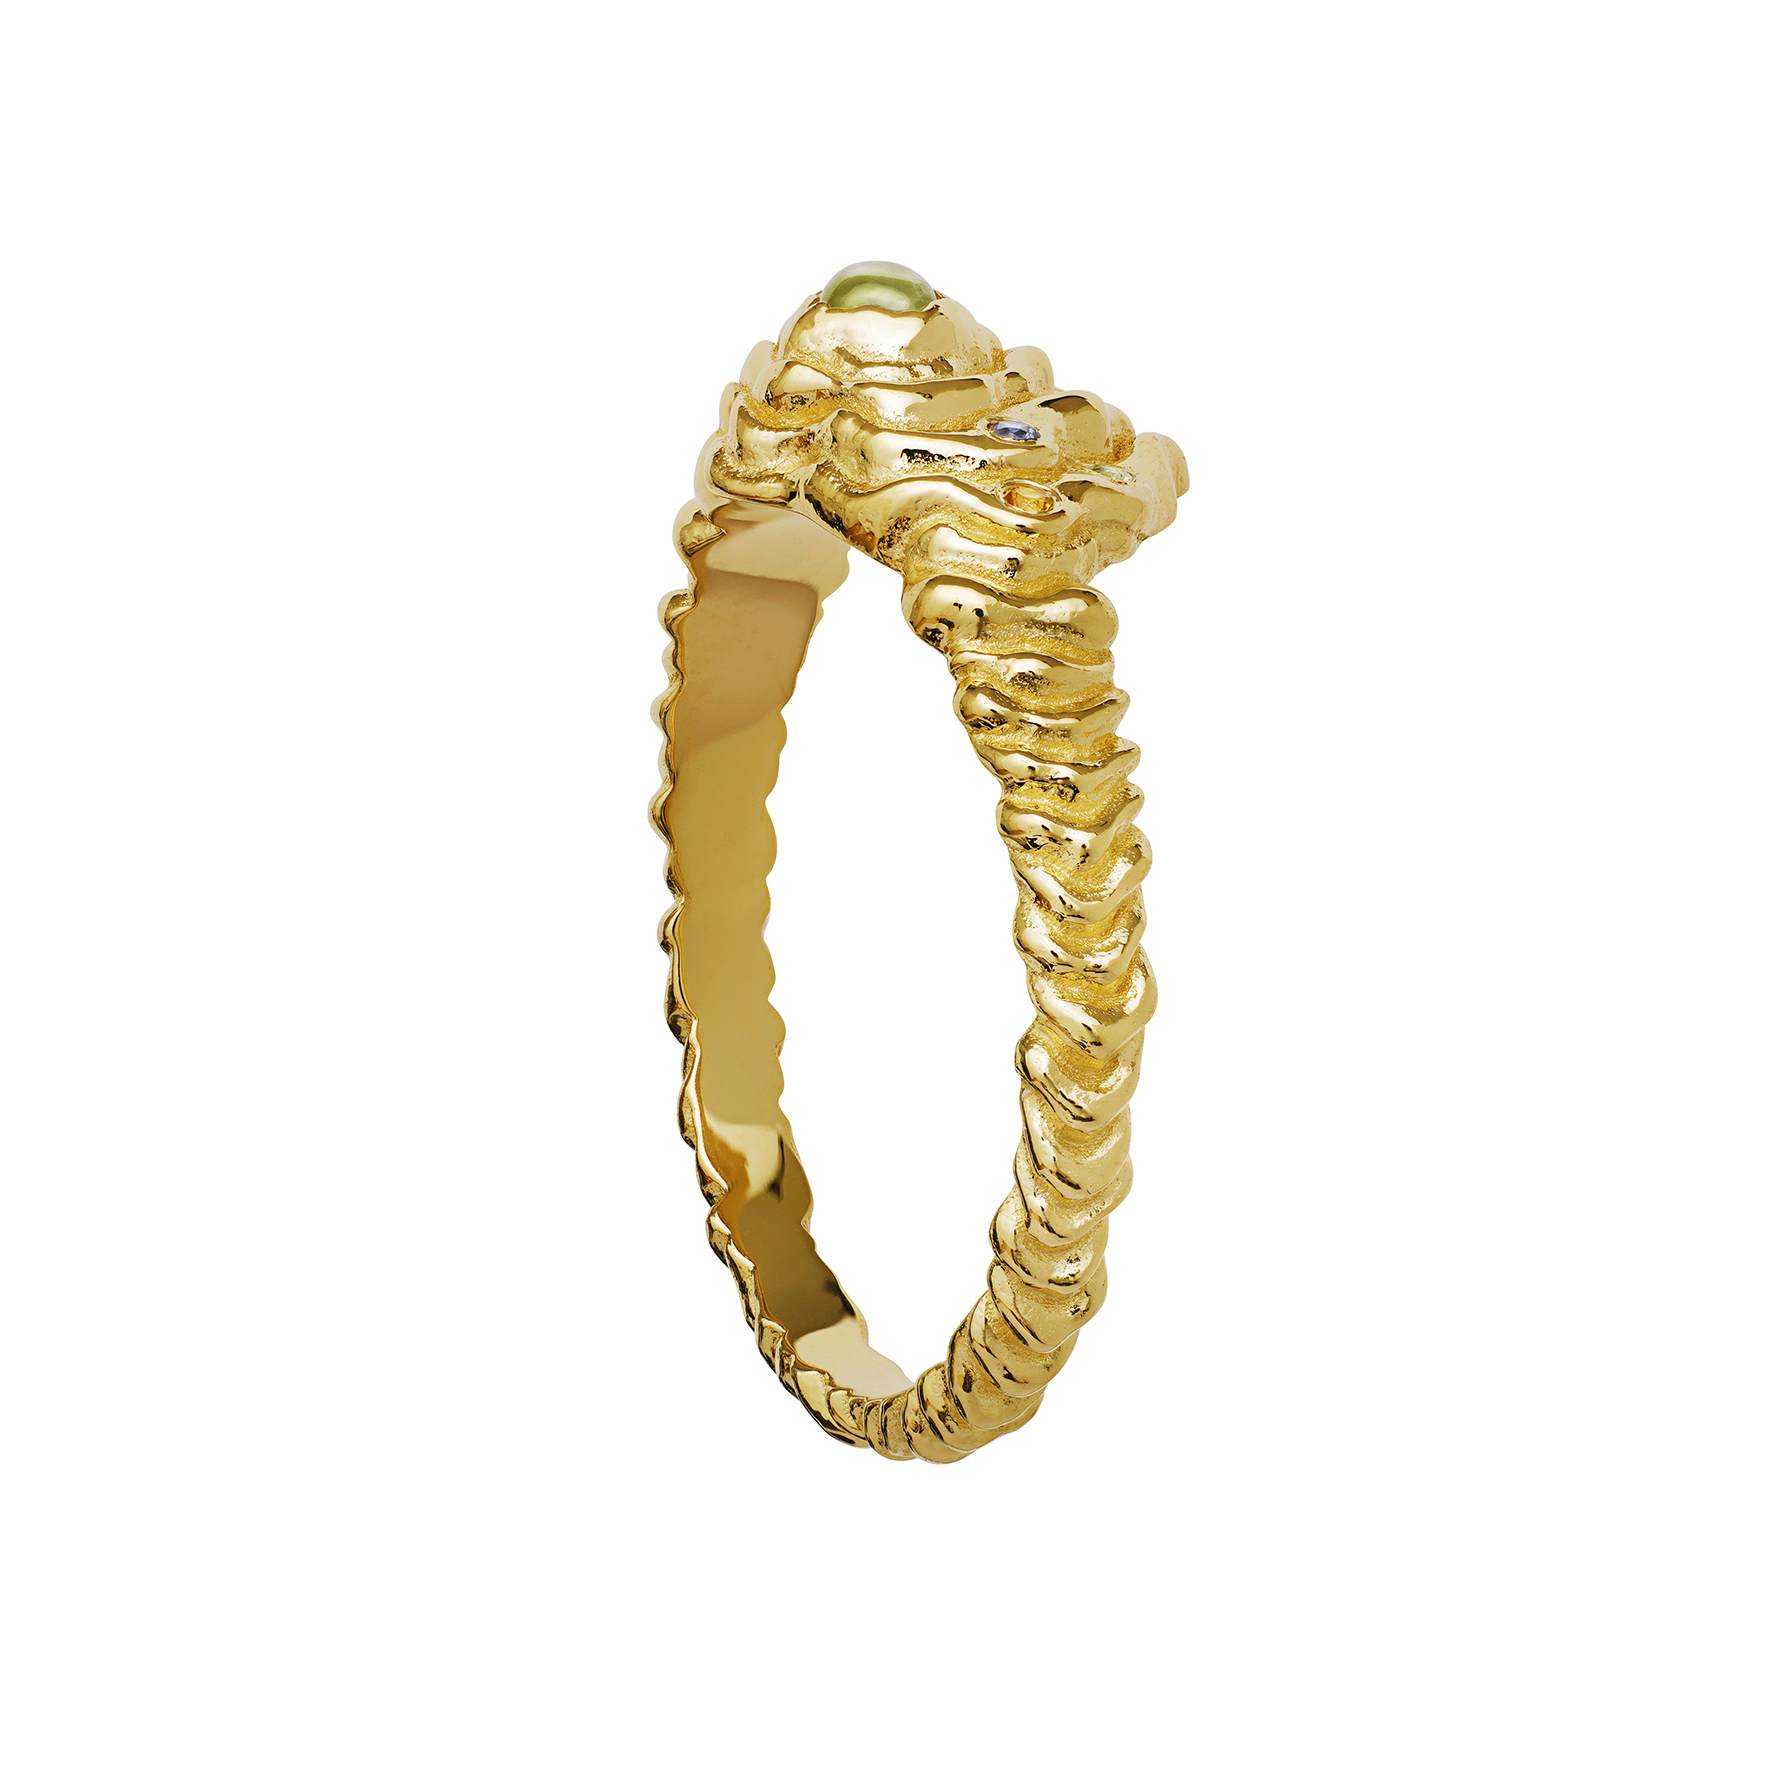 Aia Ring from Maanesten in Goldplated-Silver Sterling 925